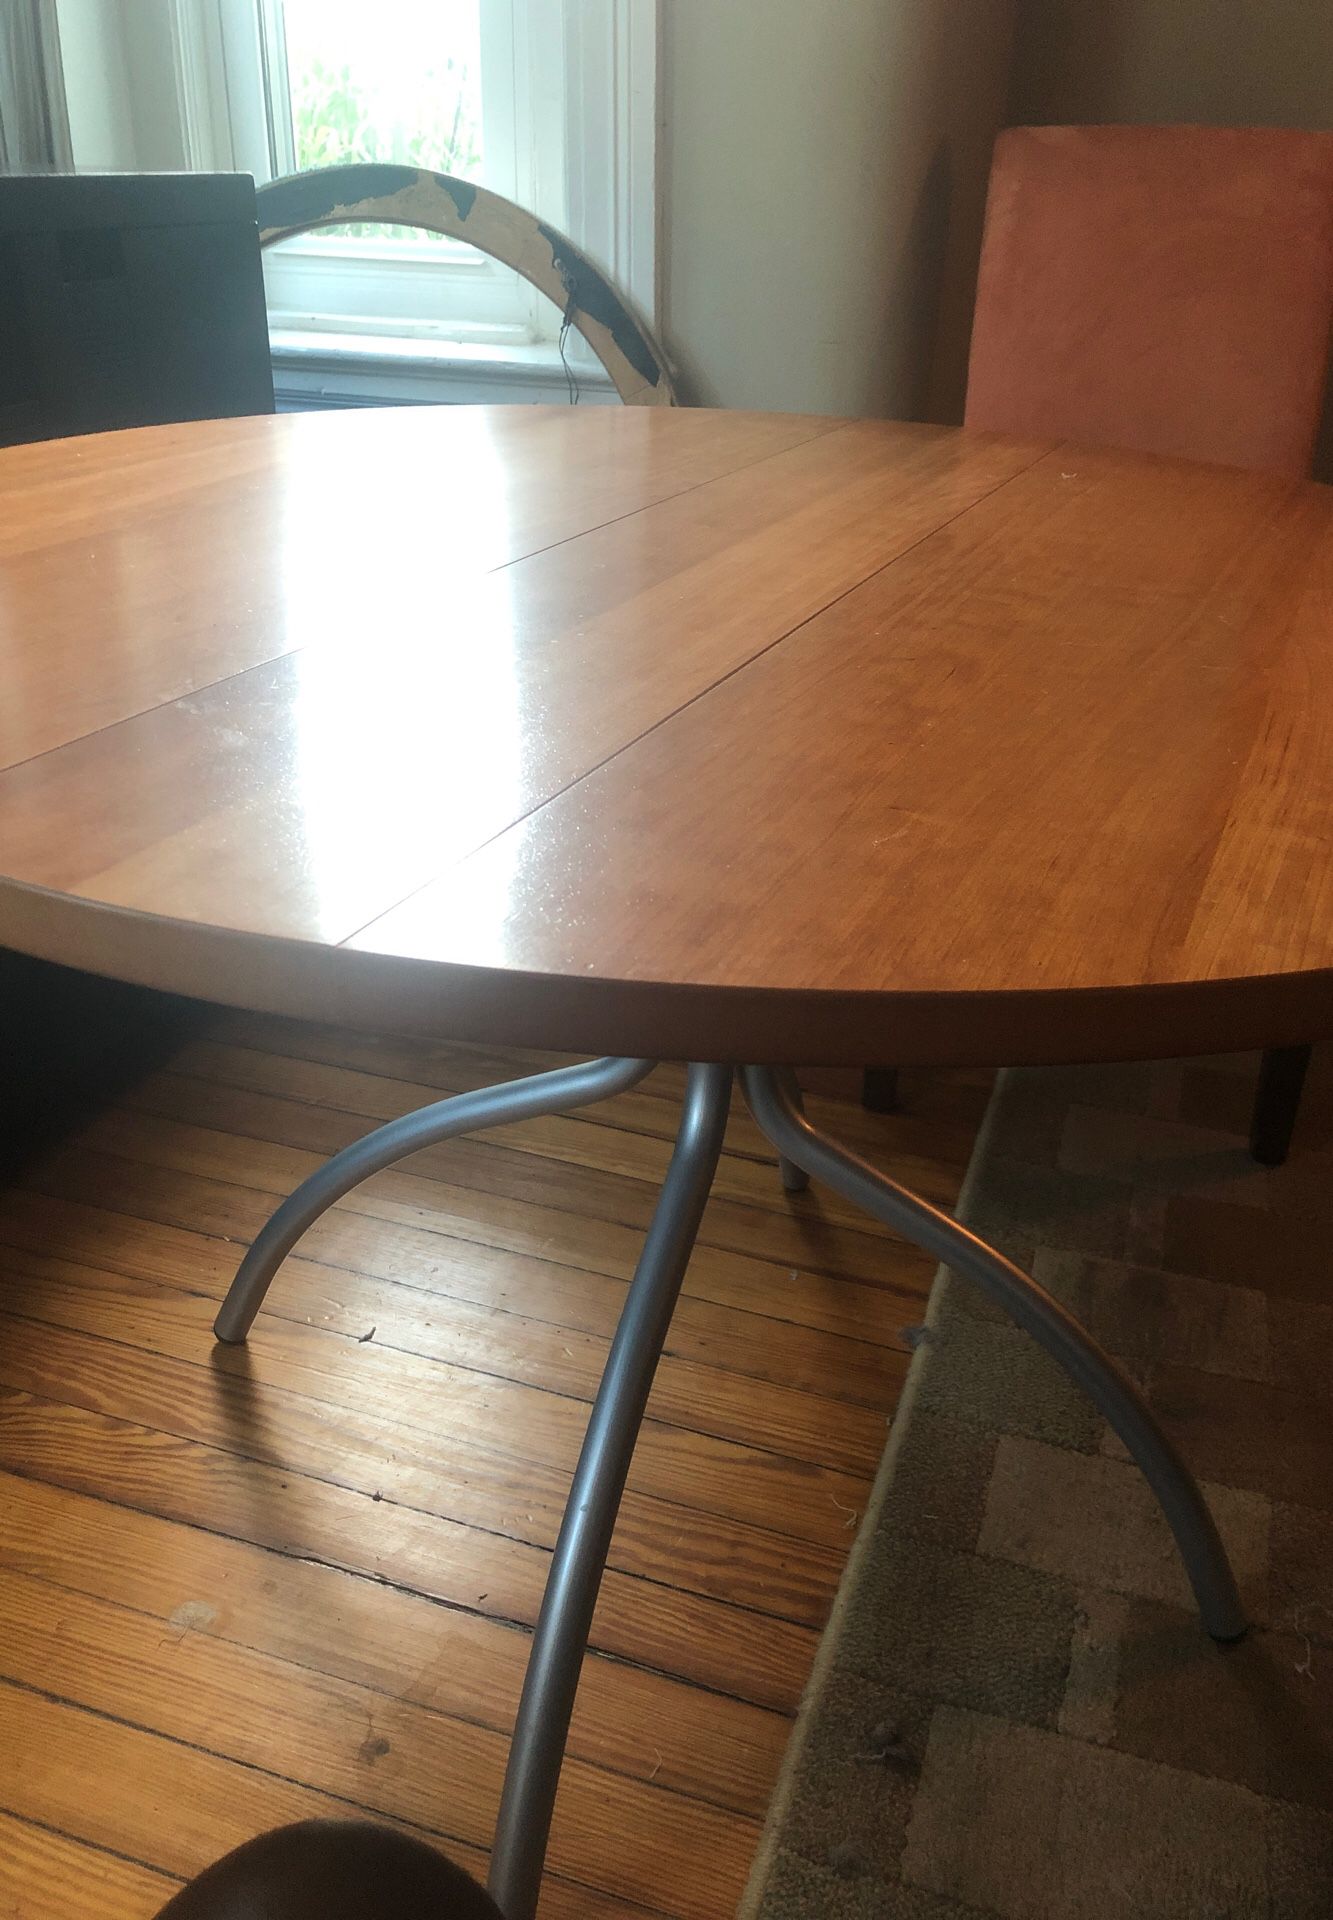 Dining table folds down